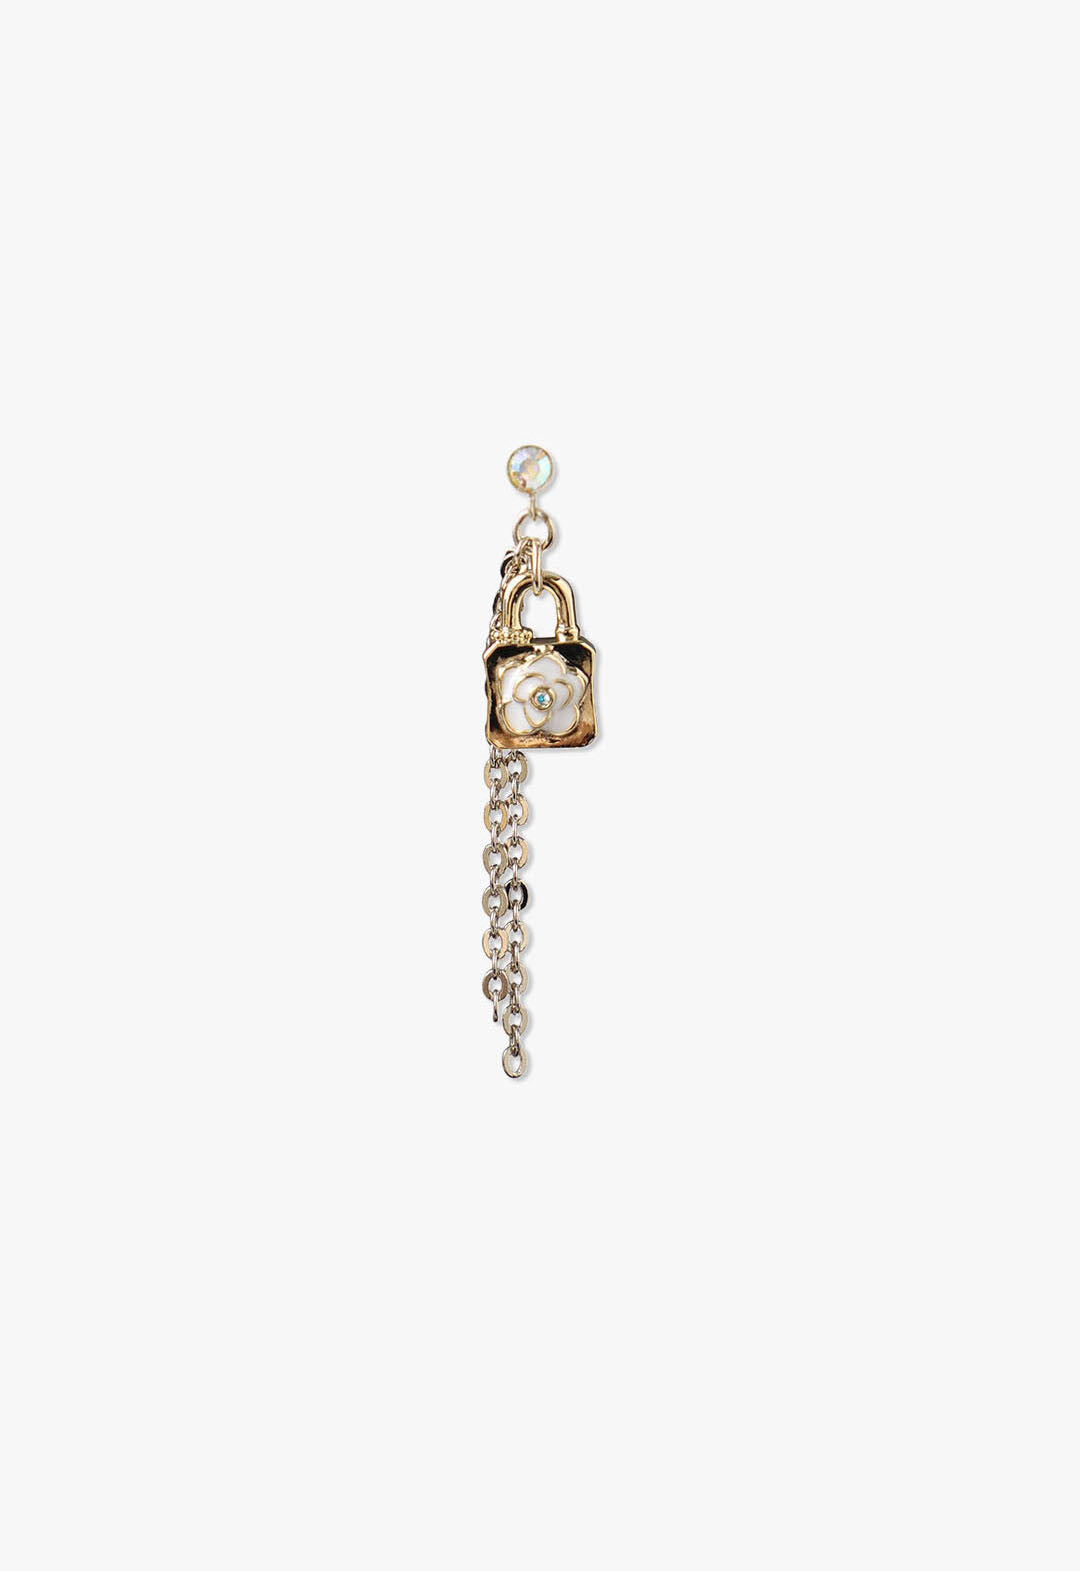 Metal gold plating, large links chain, a lock with a white rose a blue stone at center, studs come with a blue stone